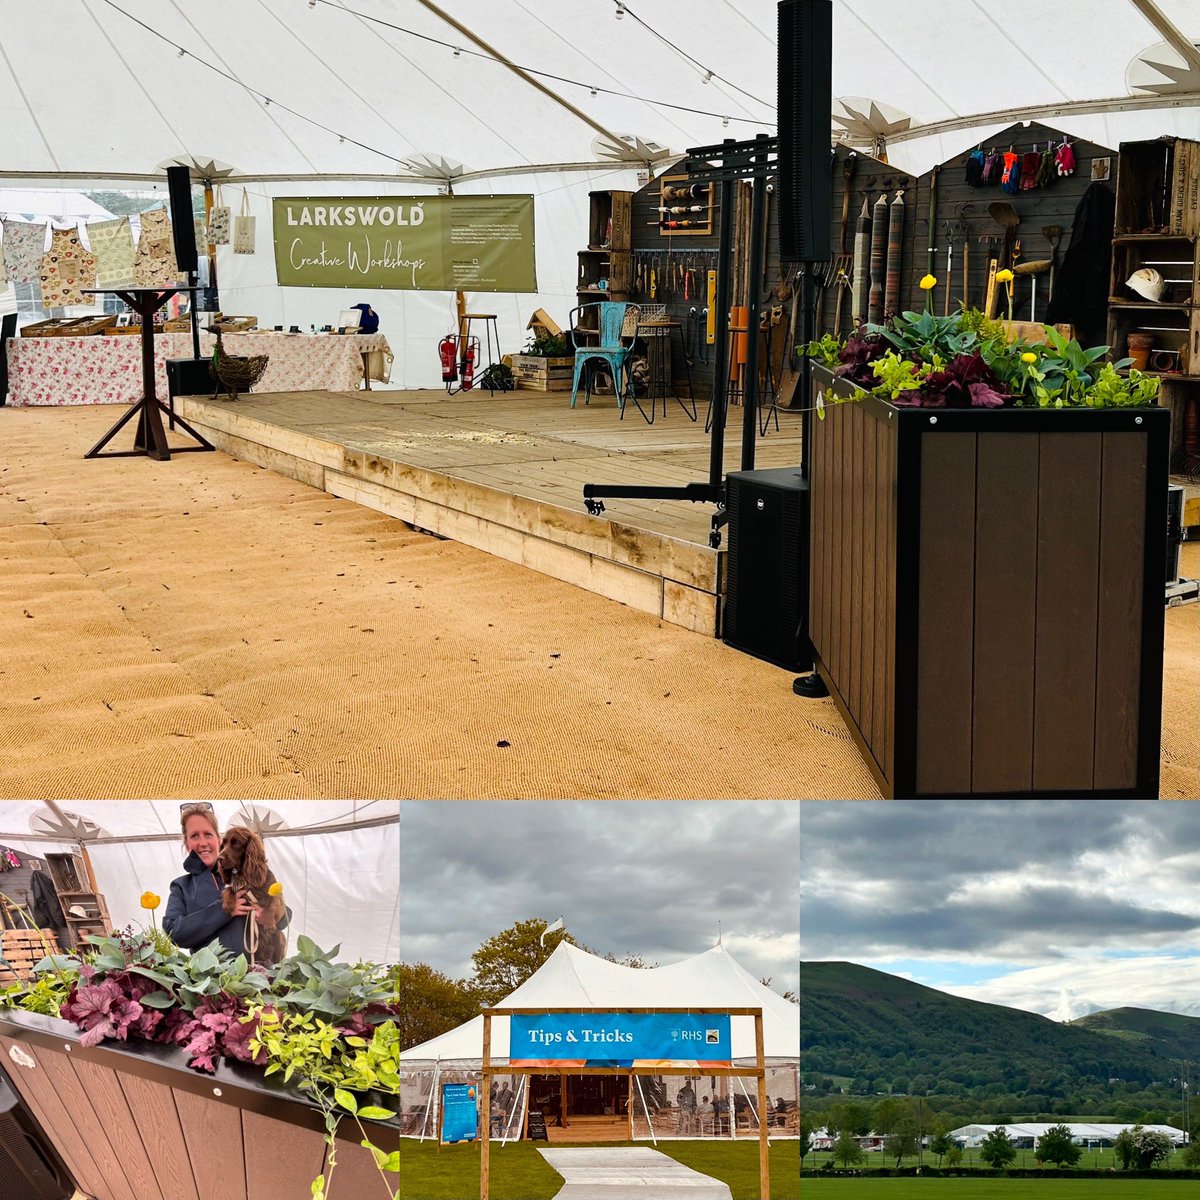 Really excited to see @SuDSPlanter feature on the ‘Tips and Tricks’ stage @MalvernShows. Rupert Keys of @KEYSCAPE & Task Academy is presenting hints and tips on how and why to conserve #water with in your garden with a little help from our SuDSP. Friend! ❤️💦